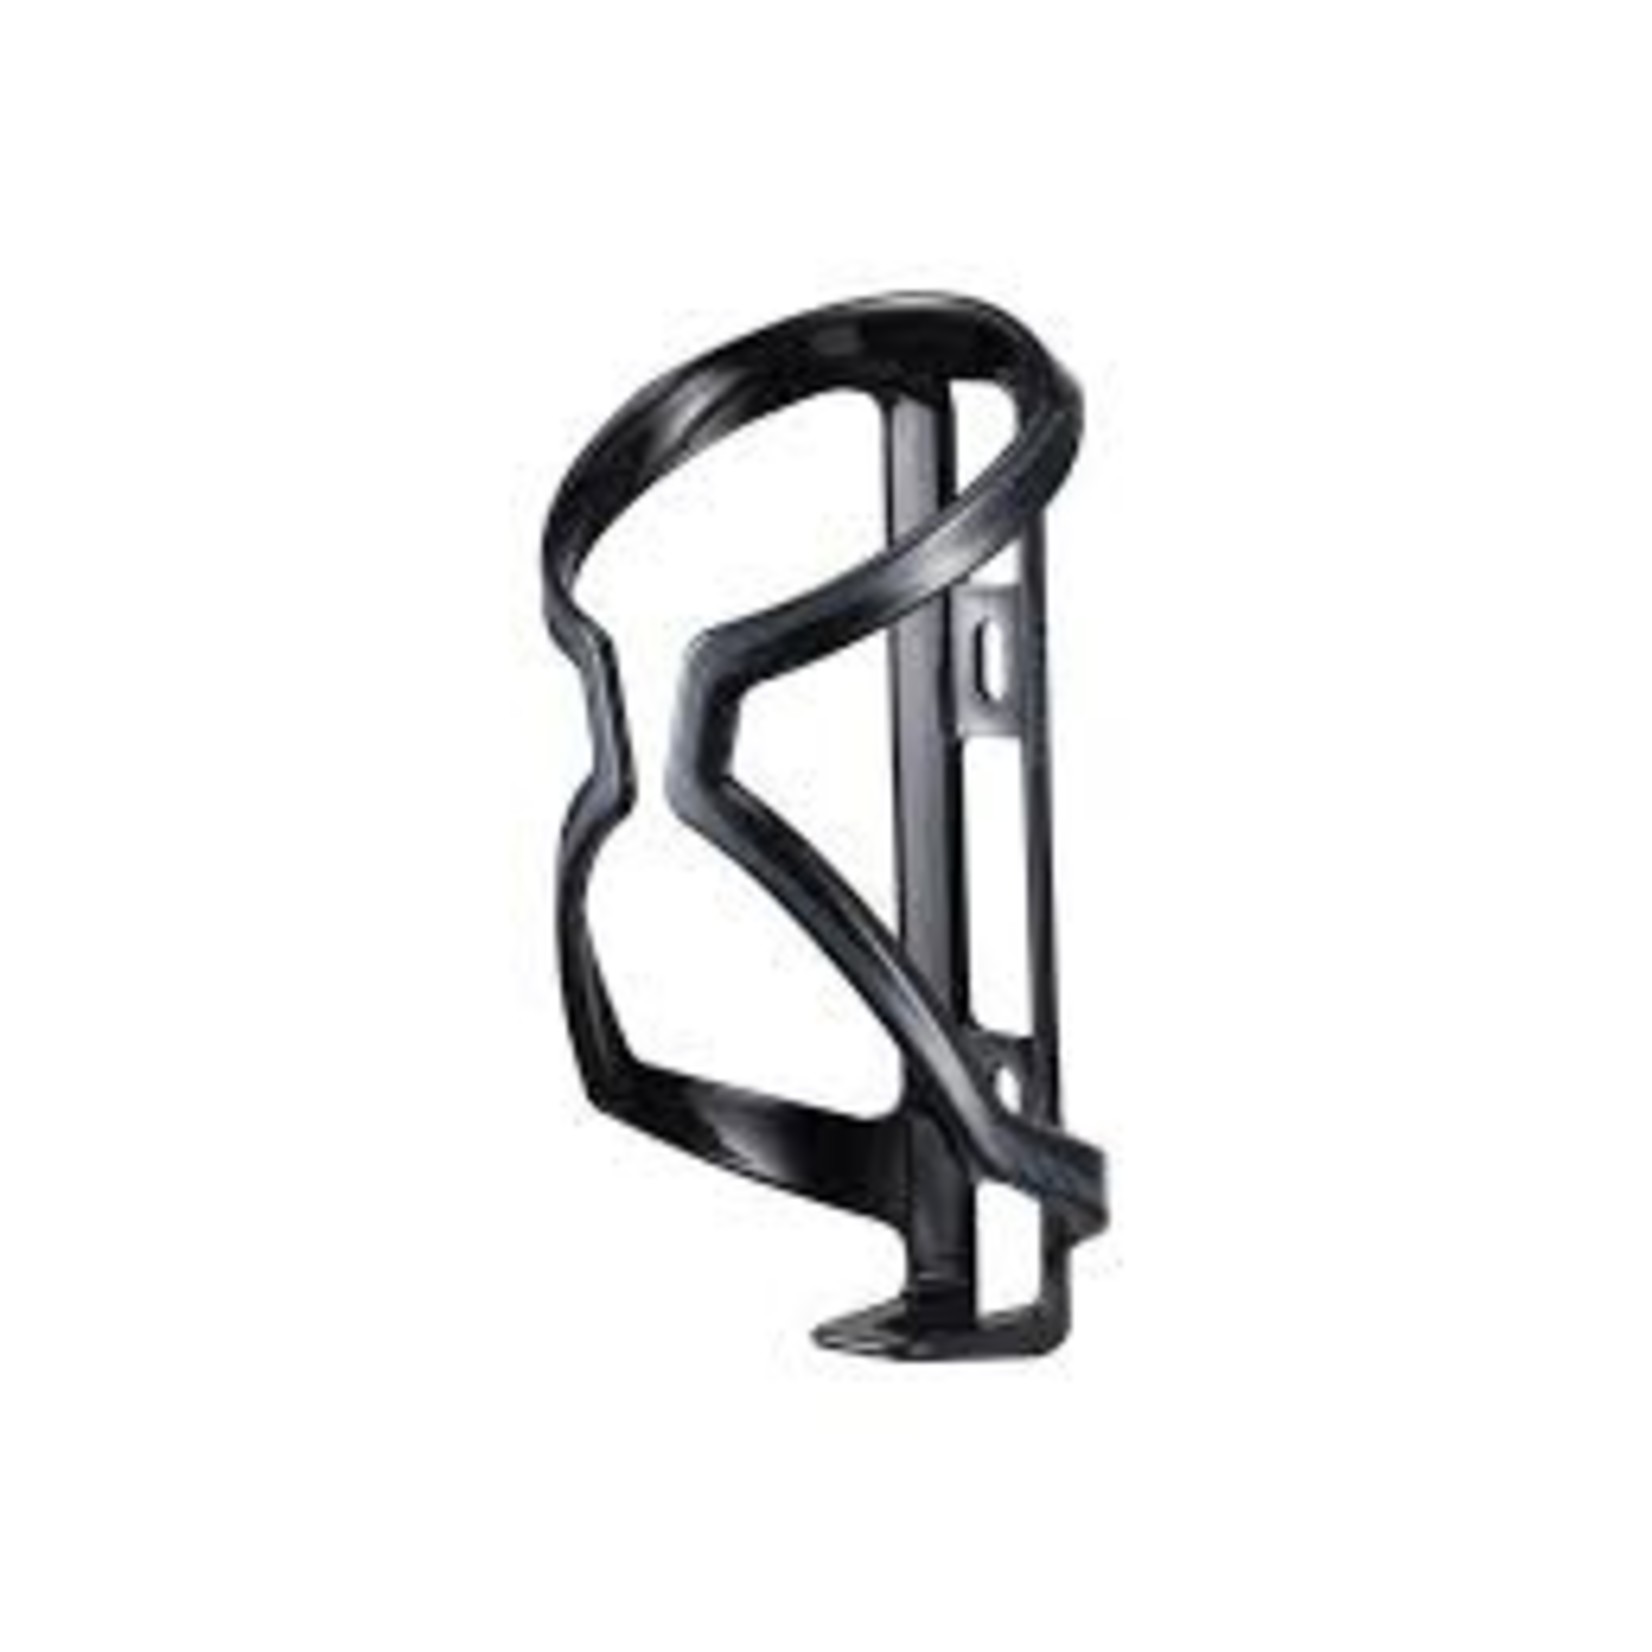 Giant Giant Airway Composite Bottle Cage Black / Blue